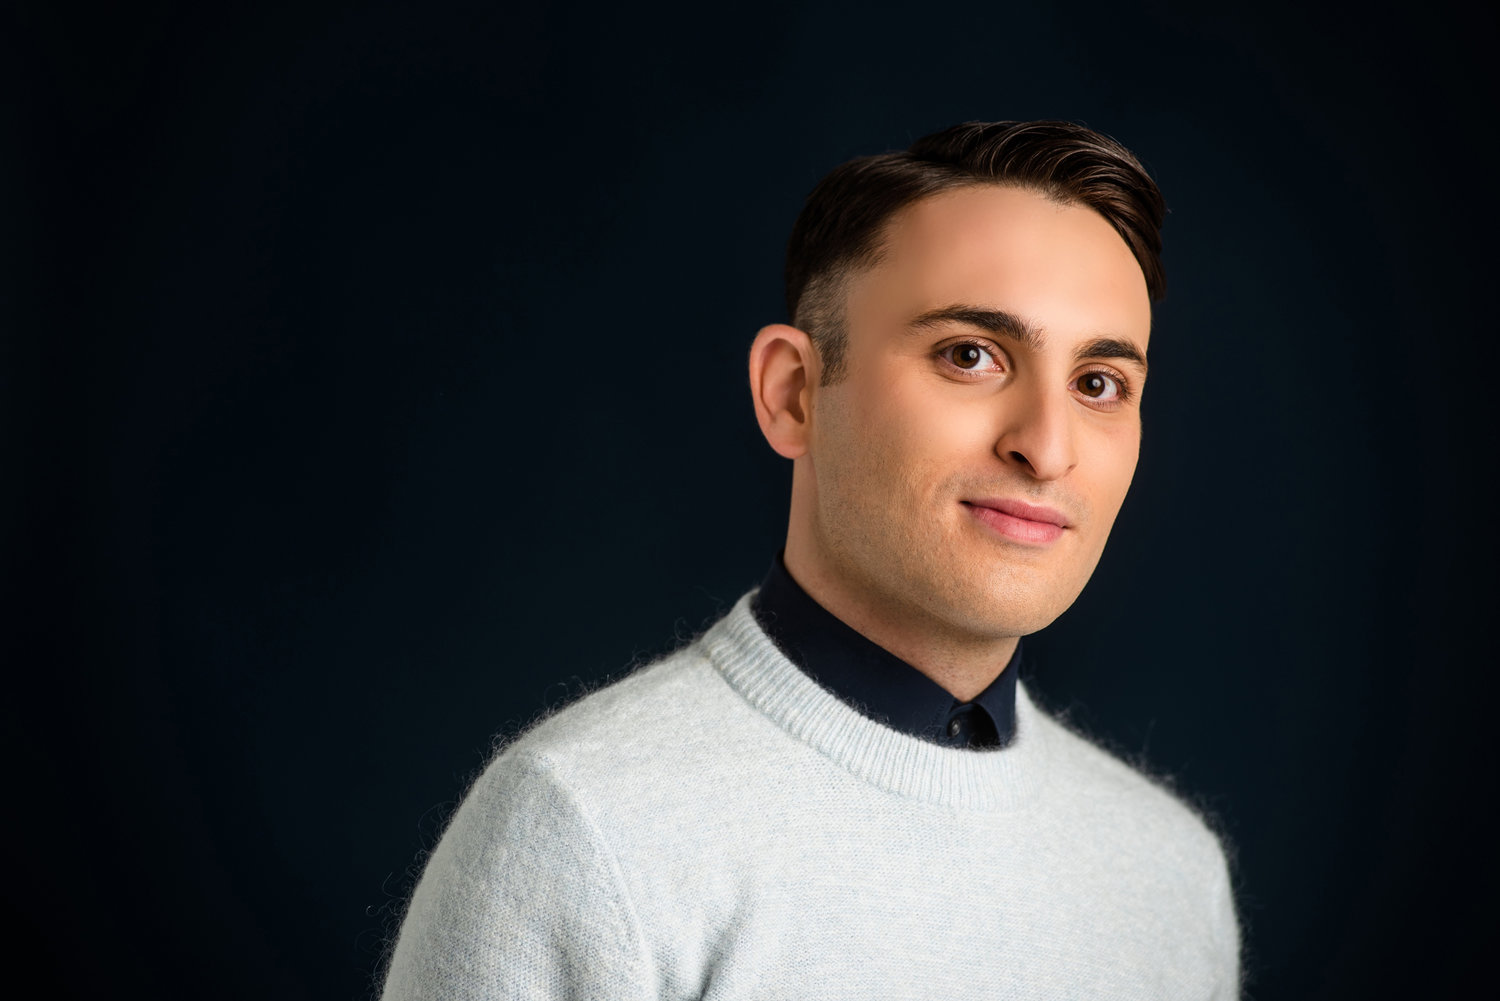 Christian Amato has traversed a long journey from someone who worked in Broadway-based theatre, to the theatrics of politics in New York City. He launches a new political consulting firm, Consense Strategies, to continue that work more formally.